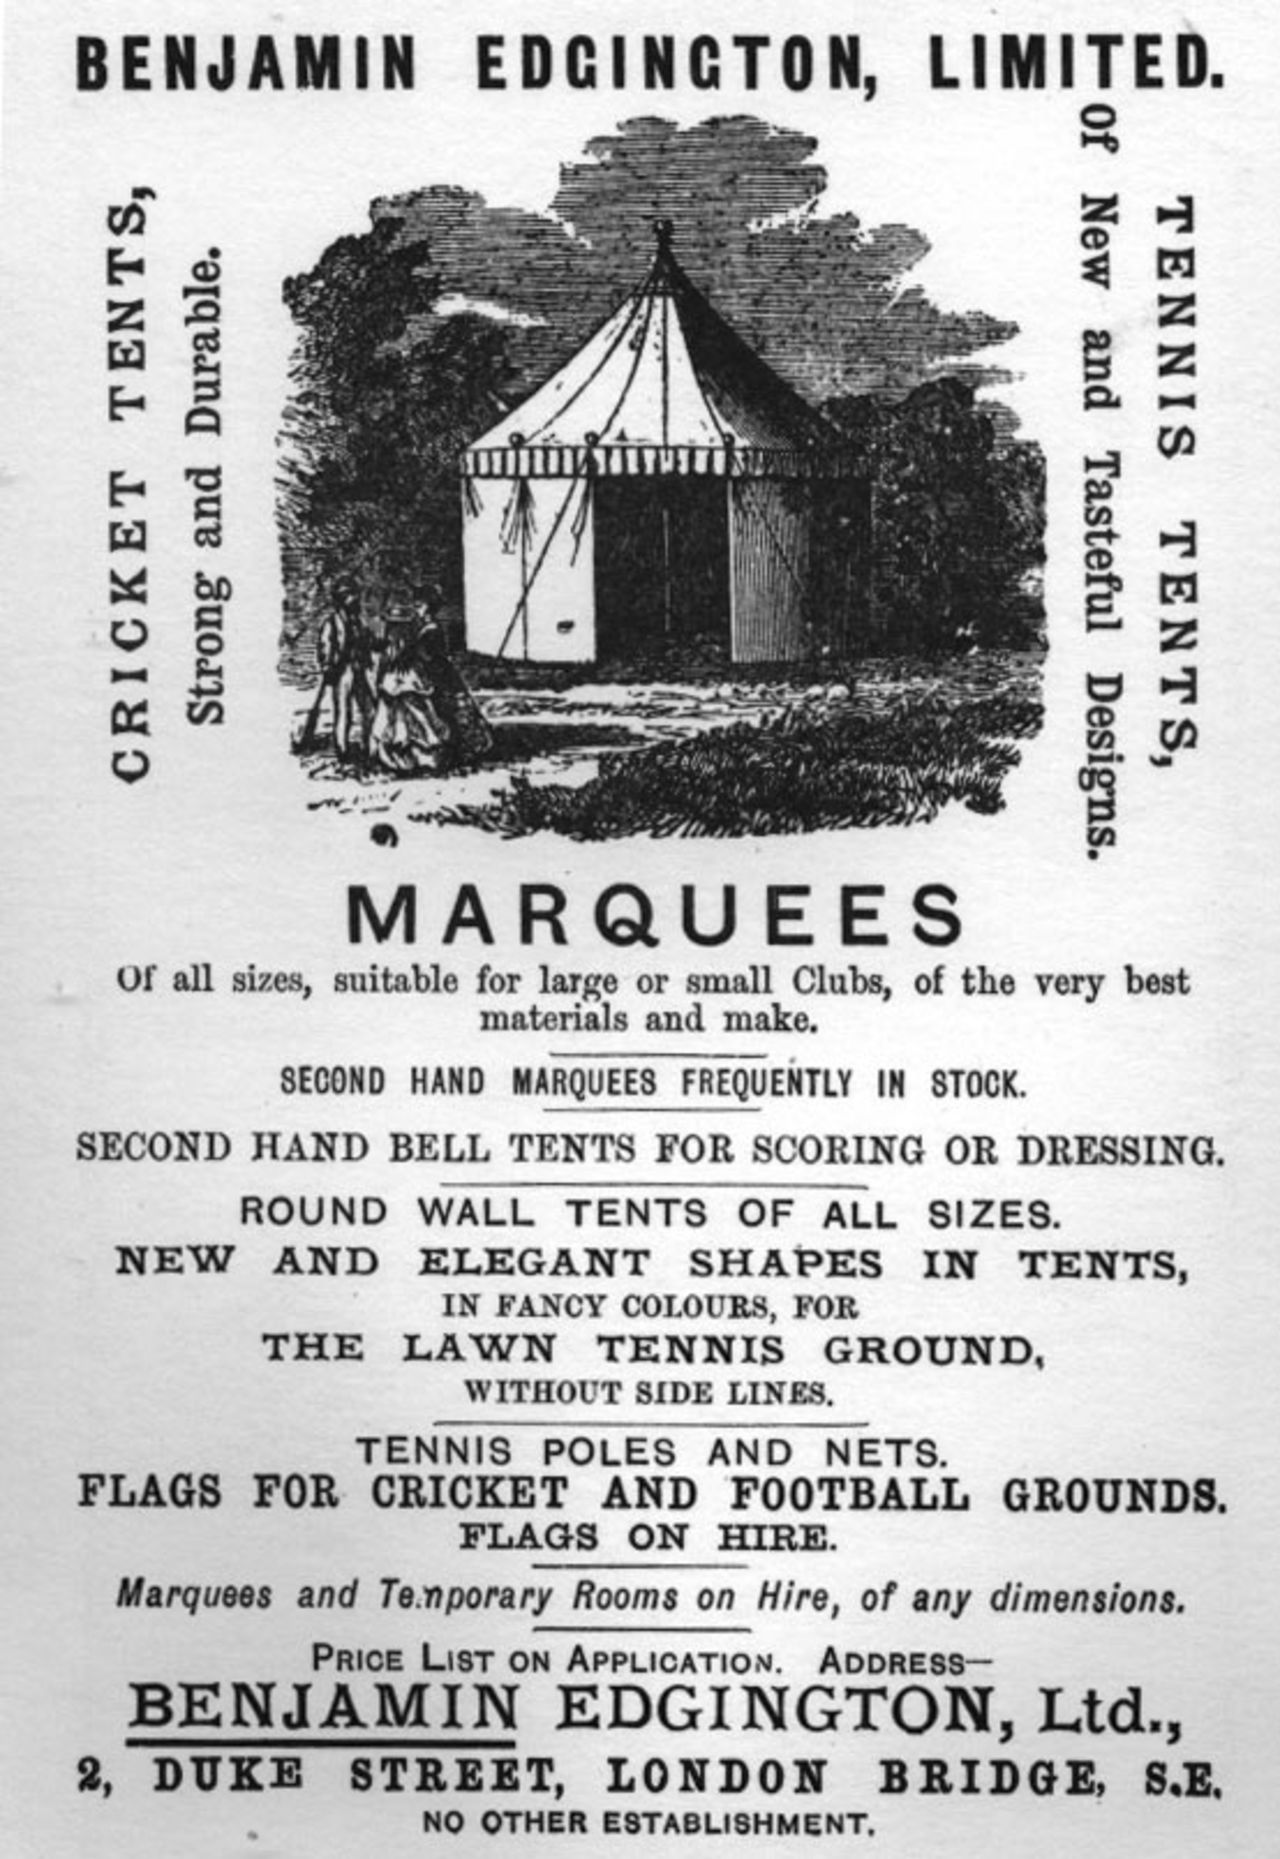 An advertisement for Benjamin Edgington Limited's marquees in the 1887 edition of the Wisden Cricketers' Almanack